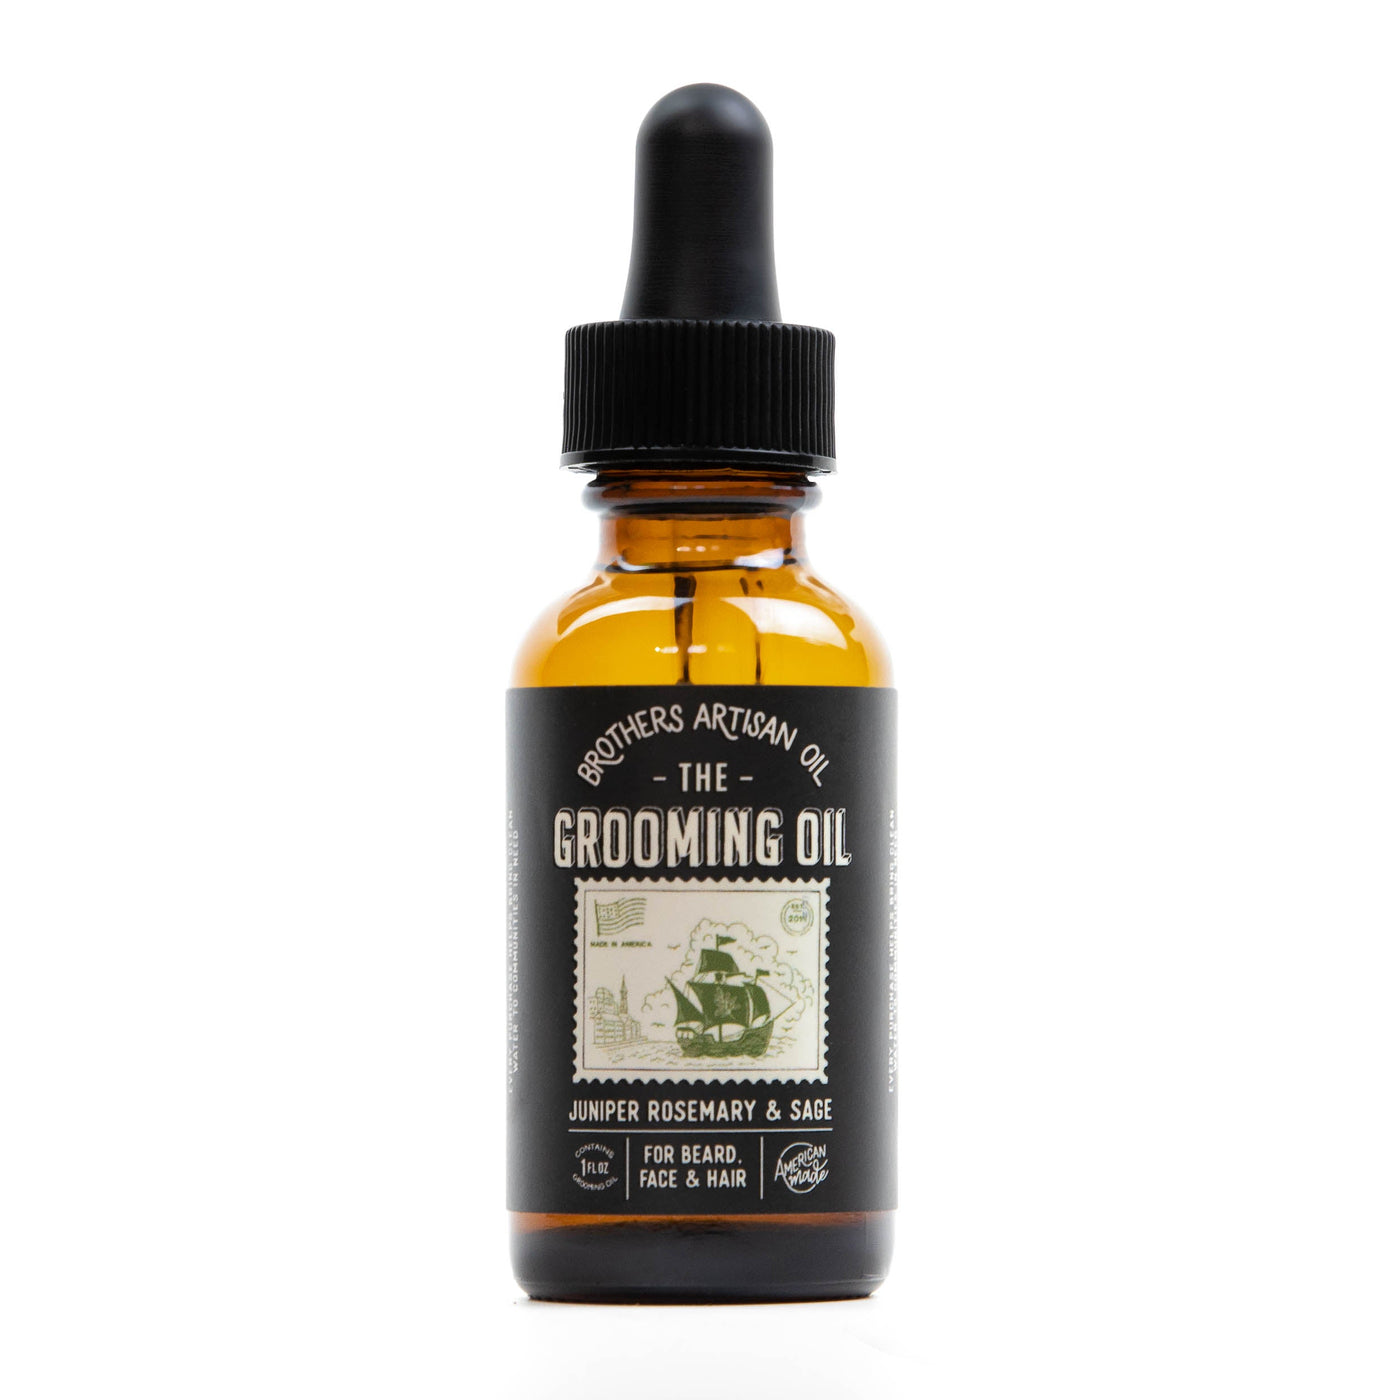 The Grooming Oil: Juniper Rosemary & Sage by Brothers Artisan Oil